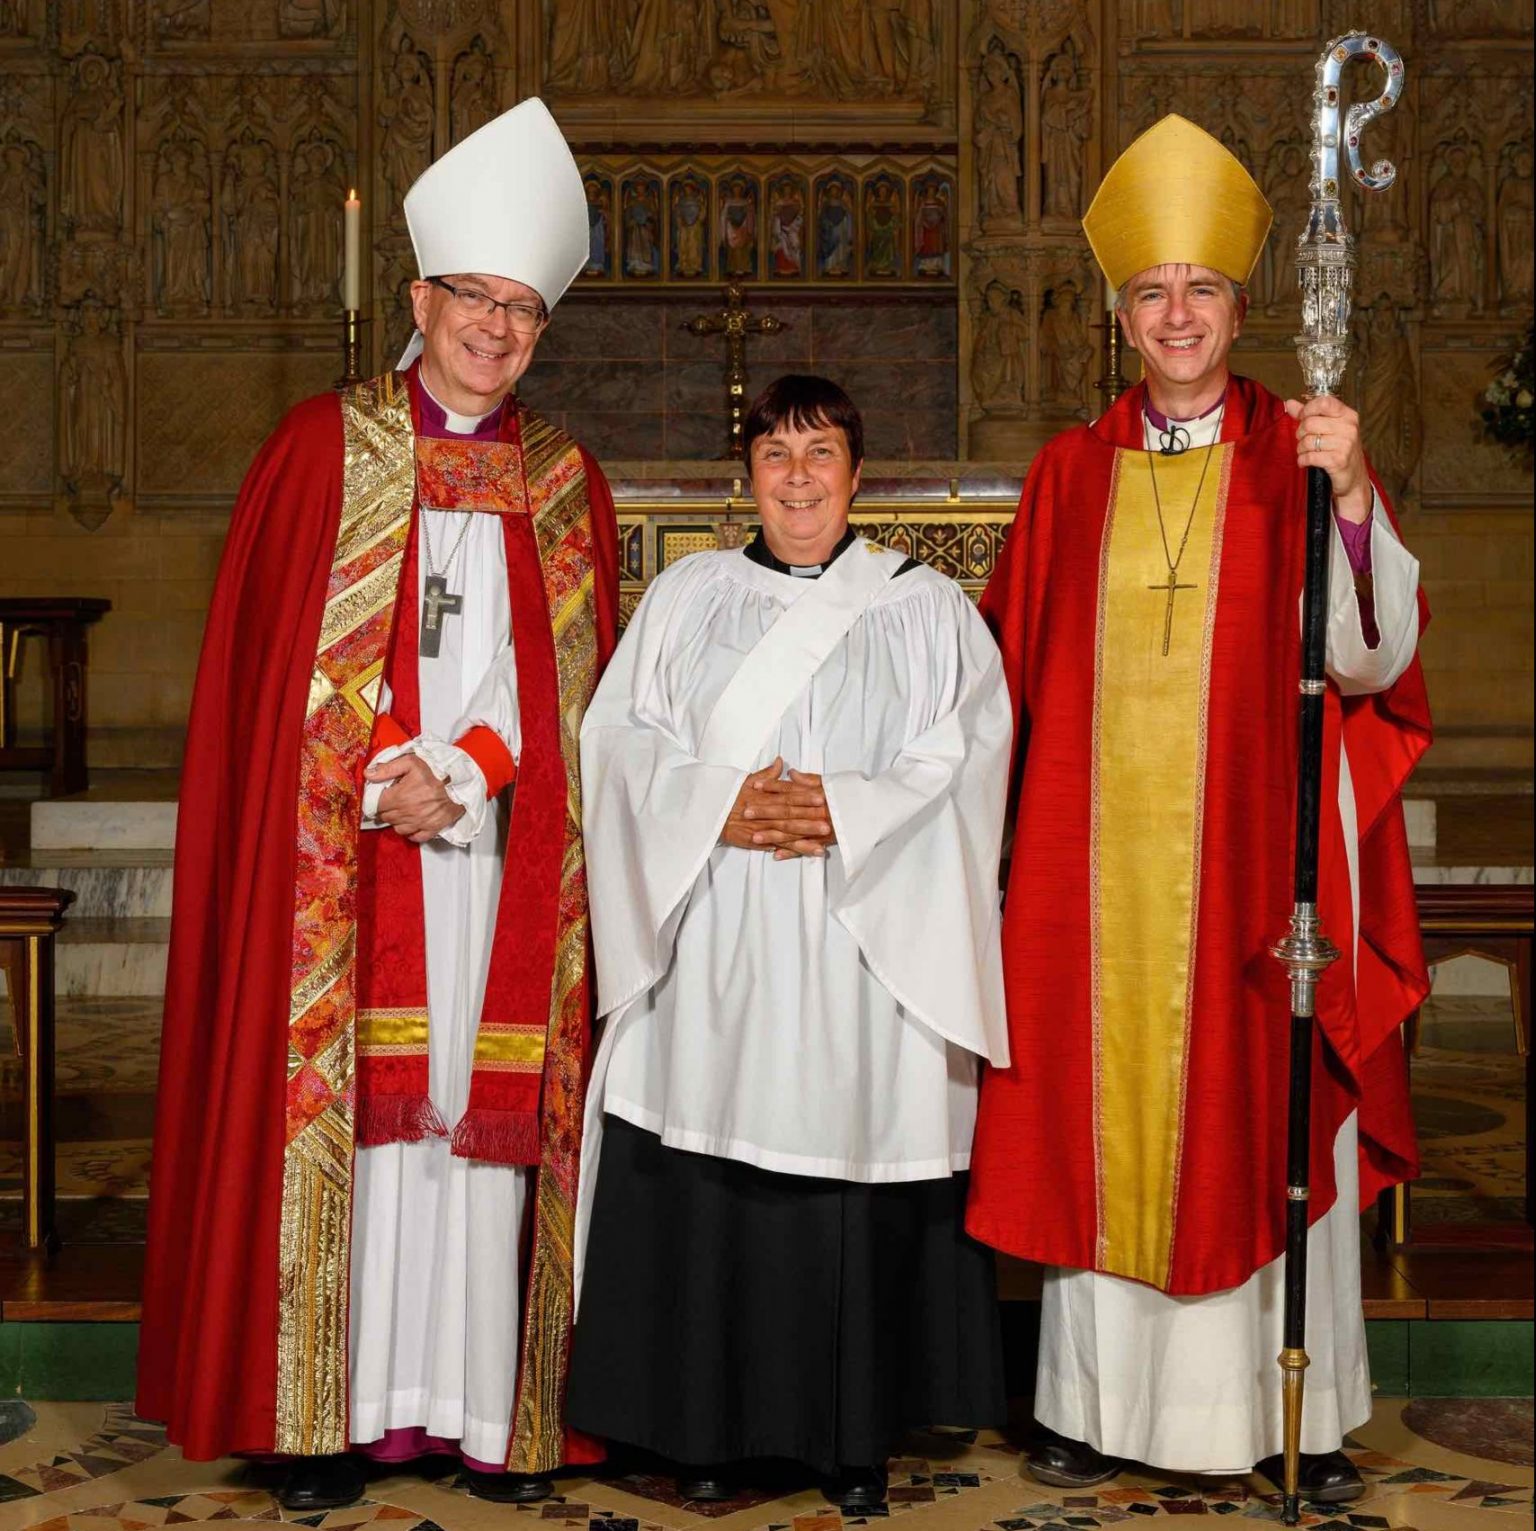 Penny Leach comes home - Truro Diocese : Truro Diocese